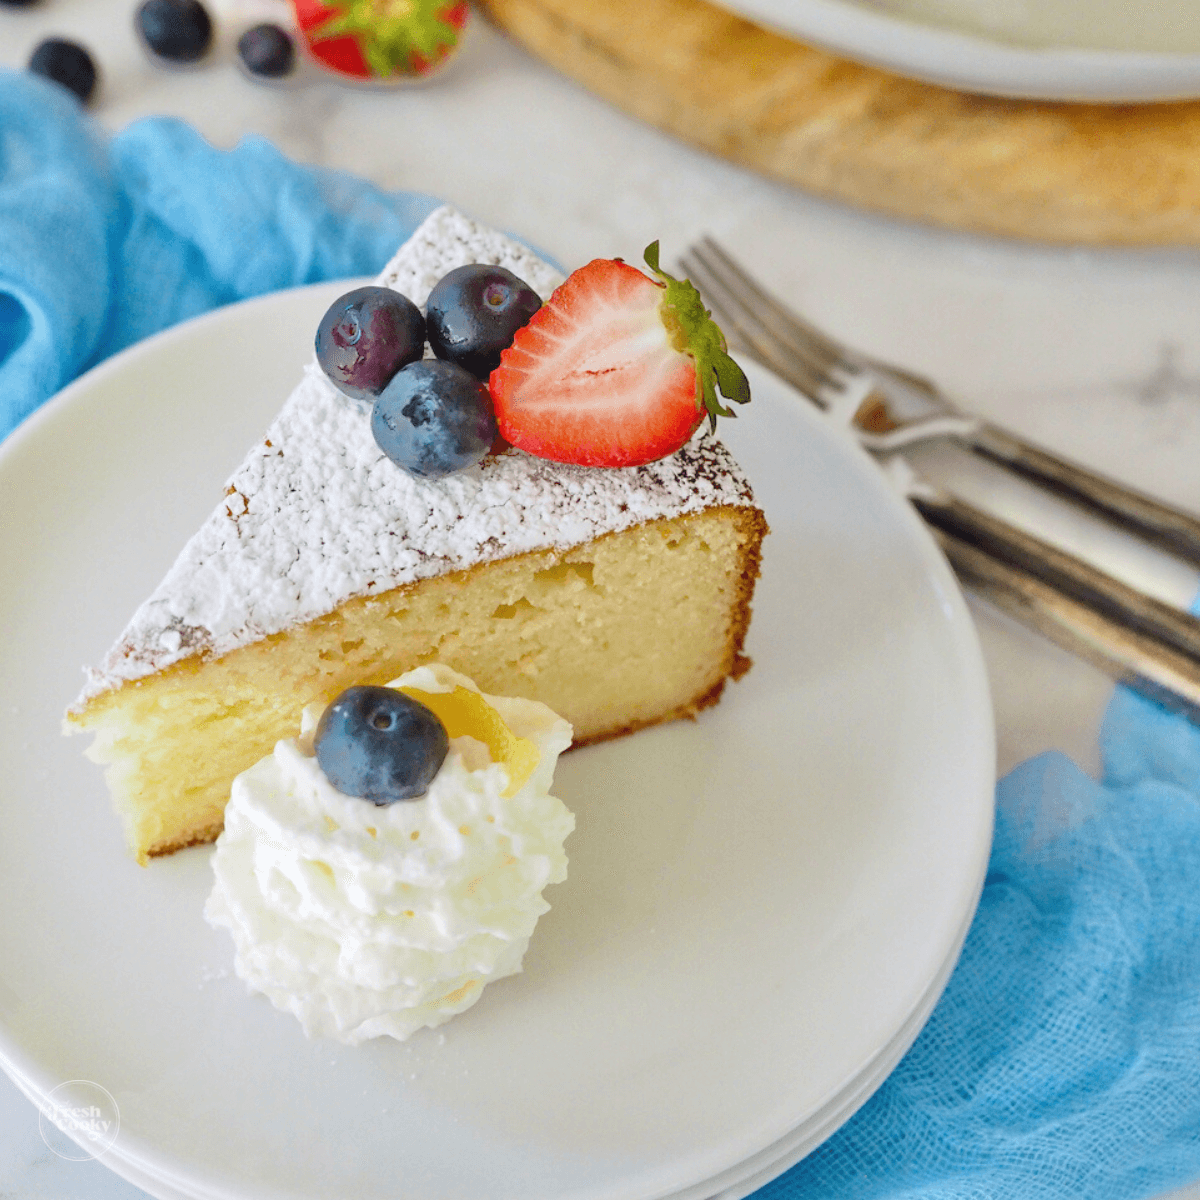 Lemon ricotta cake - The clever meal